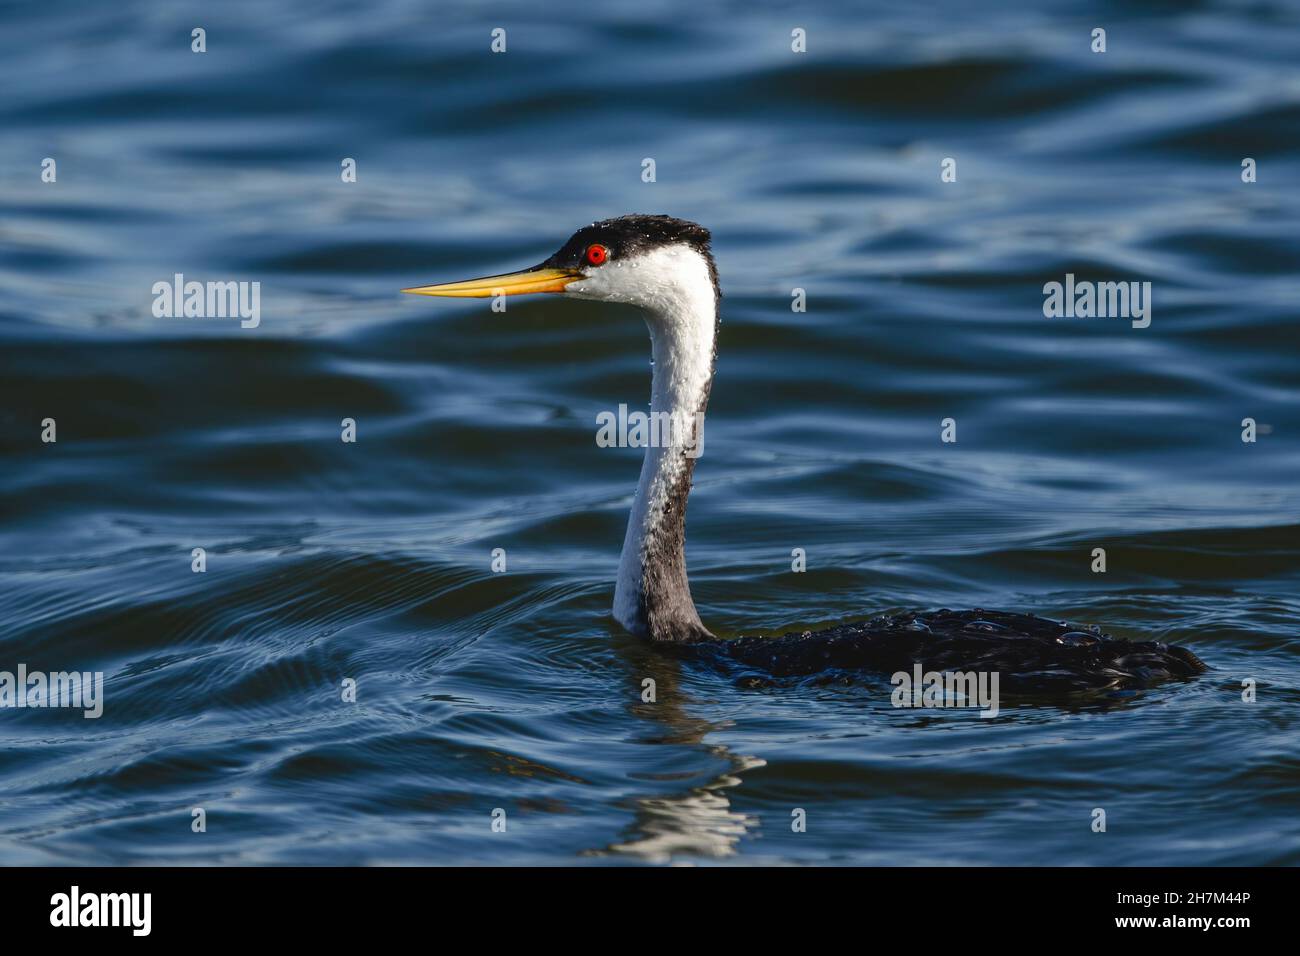 A closeup of a Clark's Grebe and Western Grebe hybrid, with its red eye, and yellowish curved beak highlighted by the sun. Stock Photo